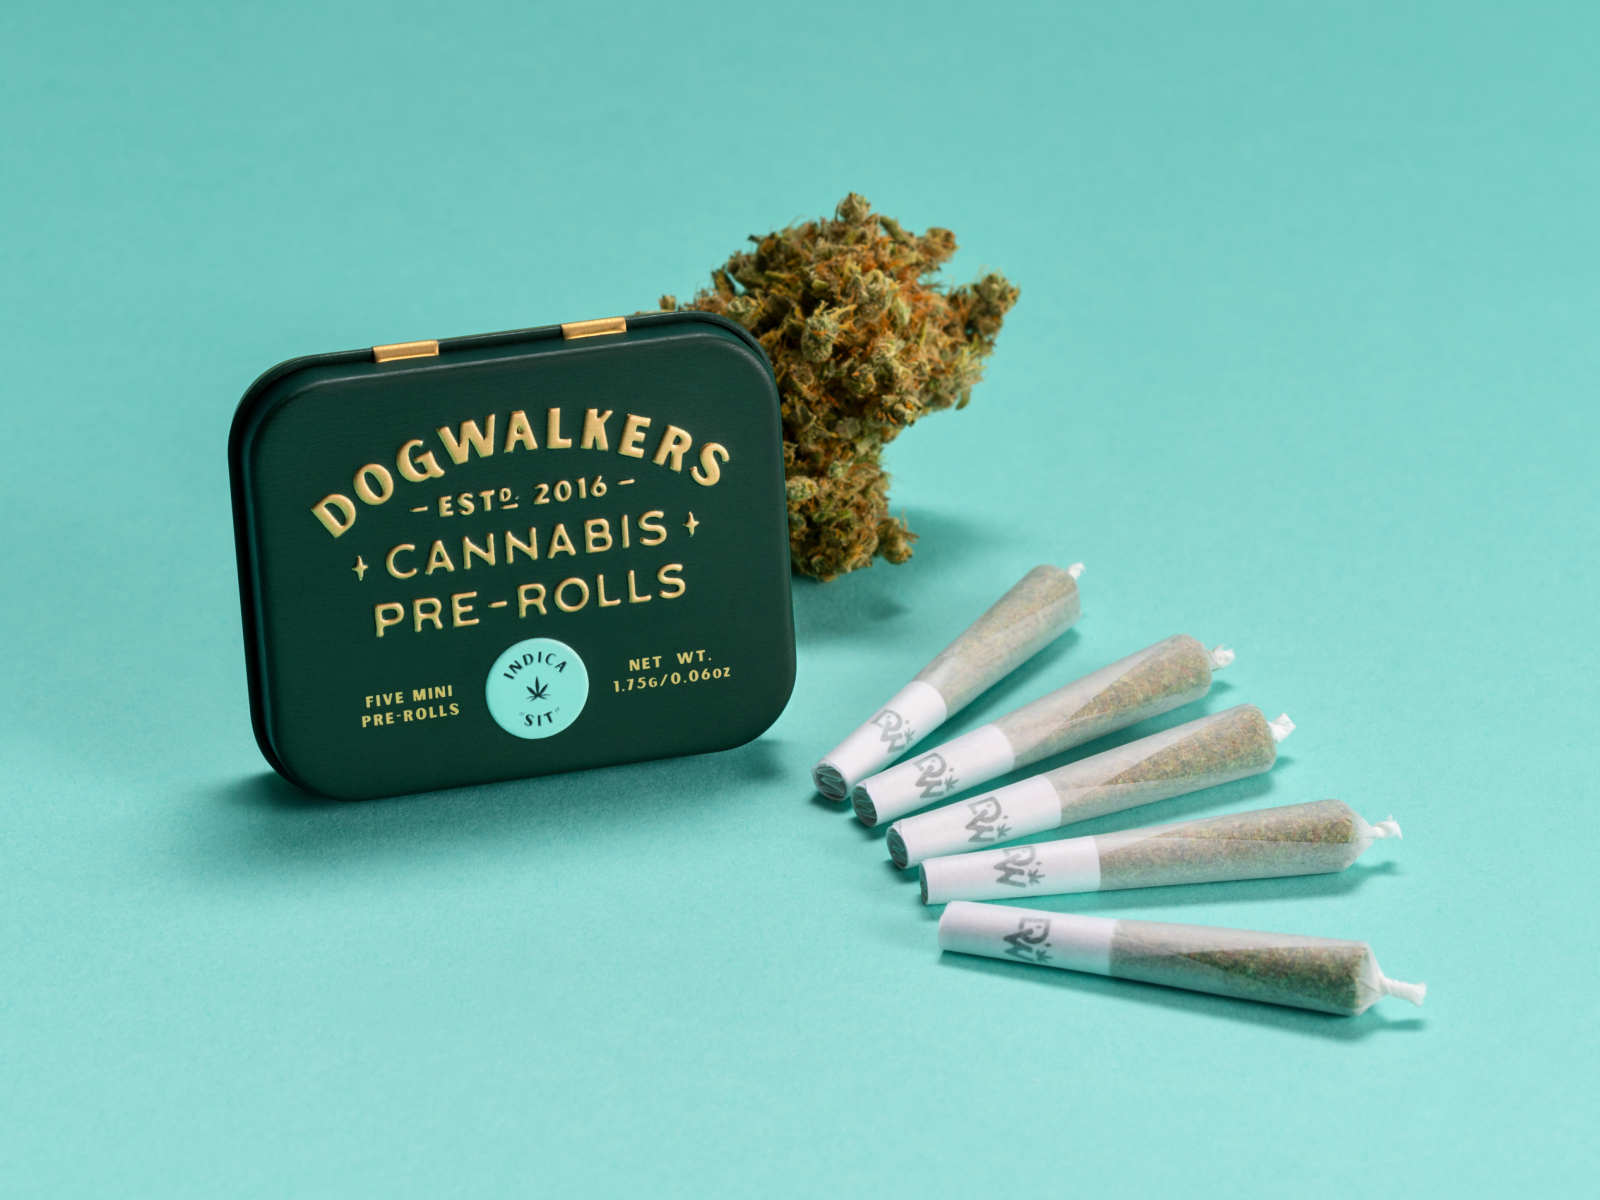 Dogwalkers Mini Pre Rolls - Indica "Sit" by Zac Jacobson on Dribbble